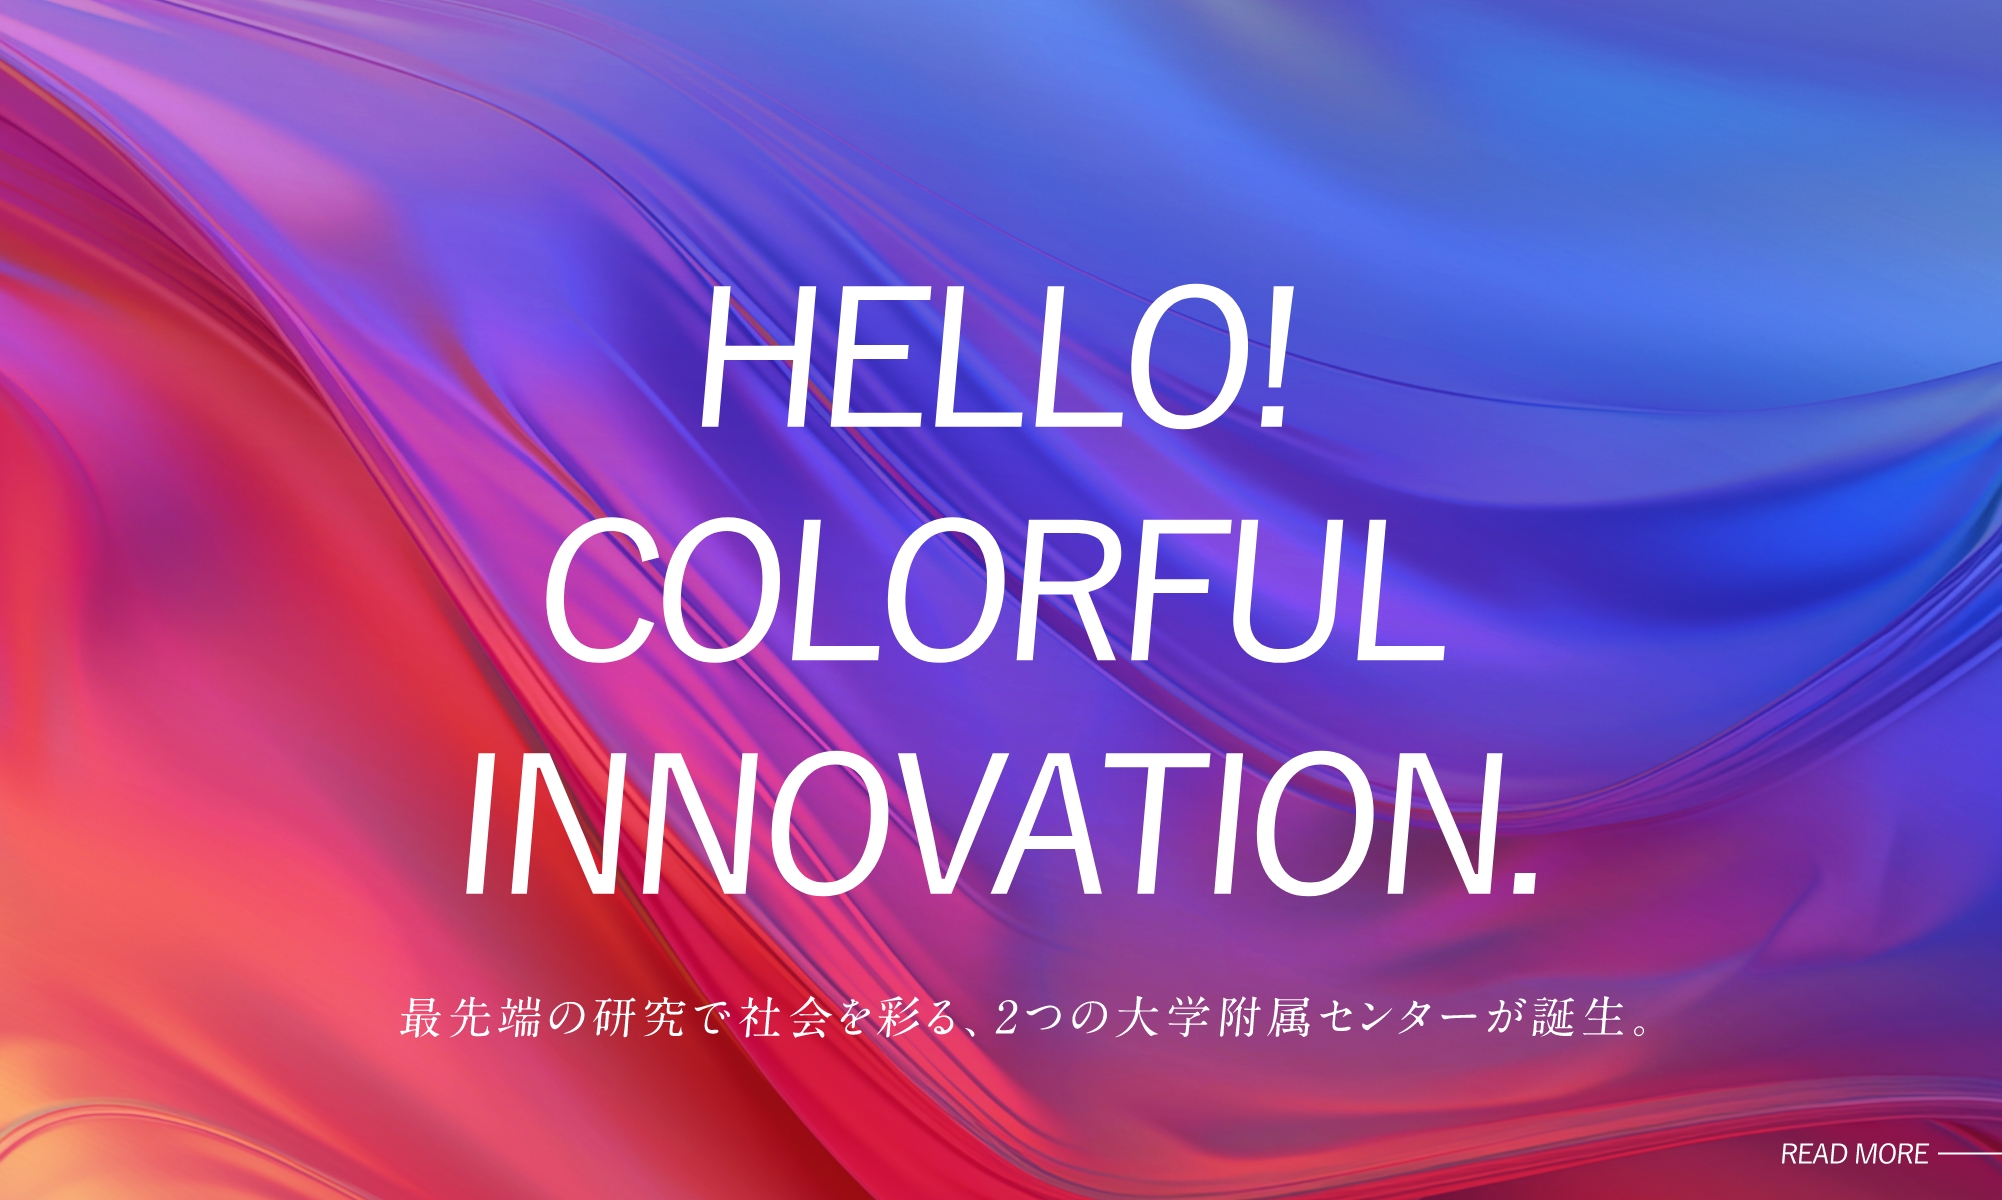 COLORFUL INNOVATION.